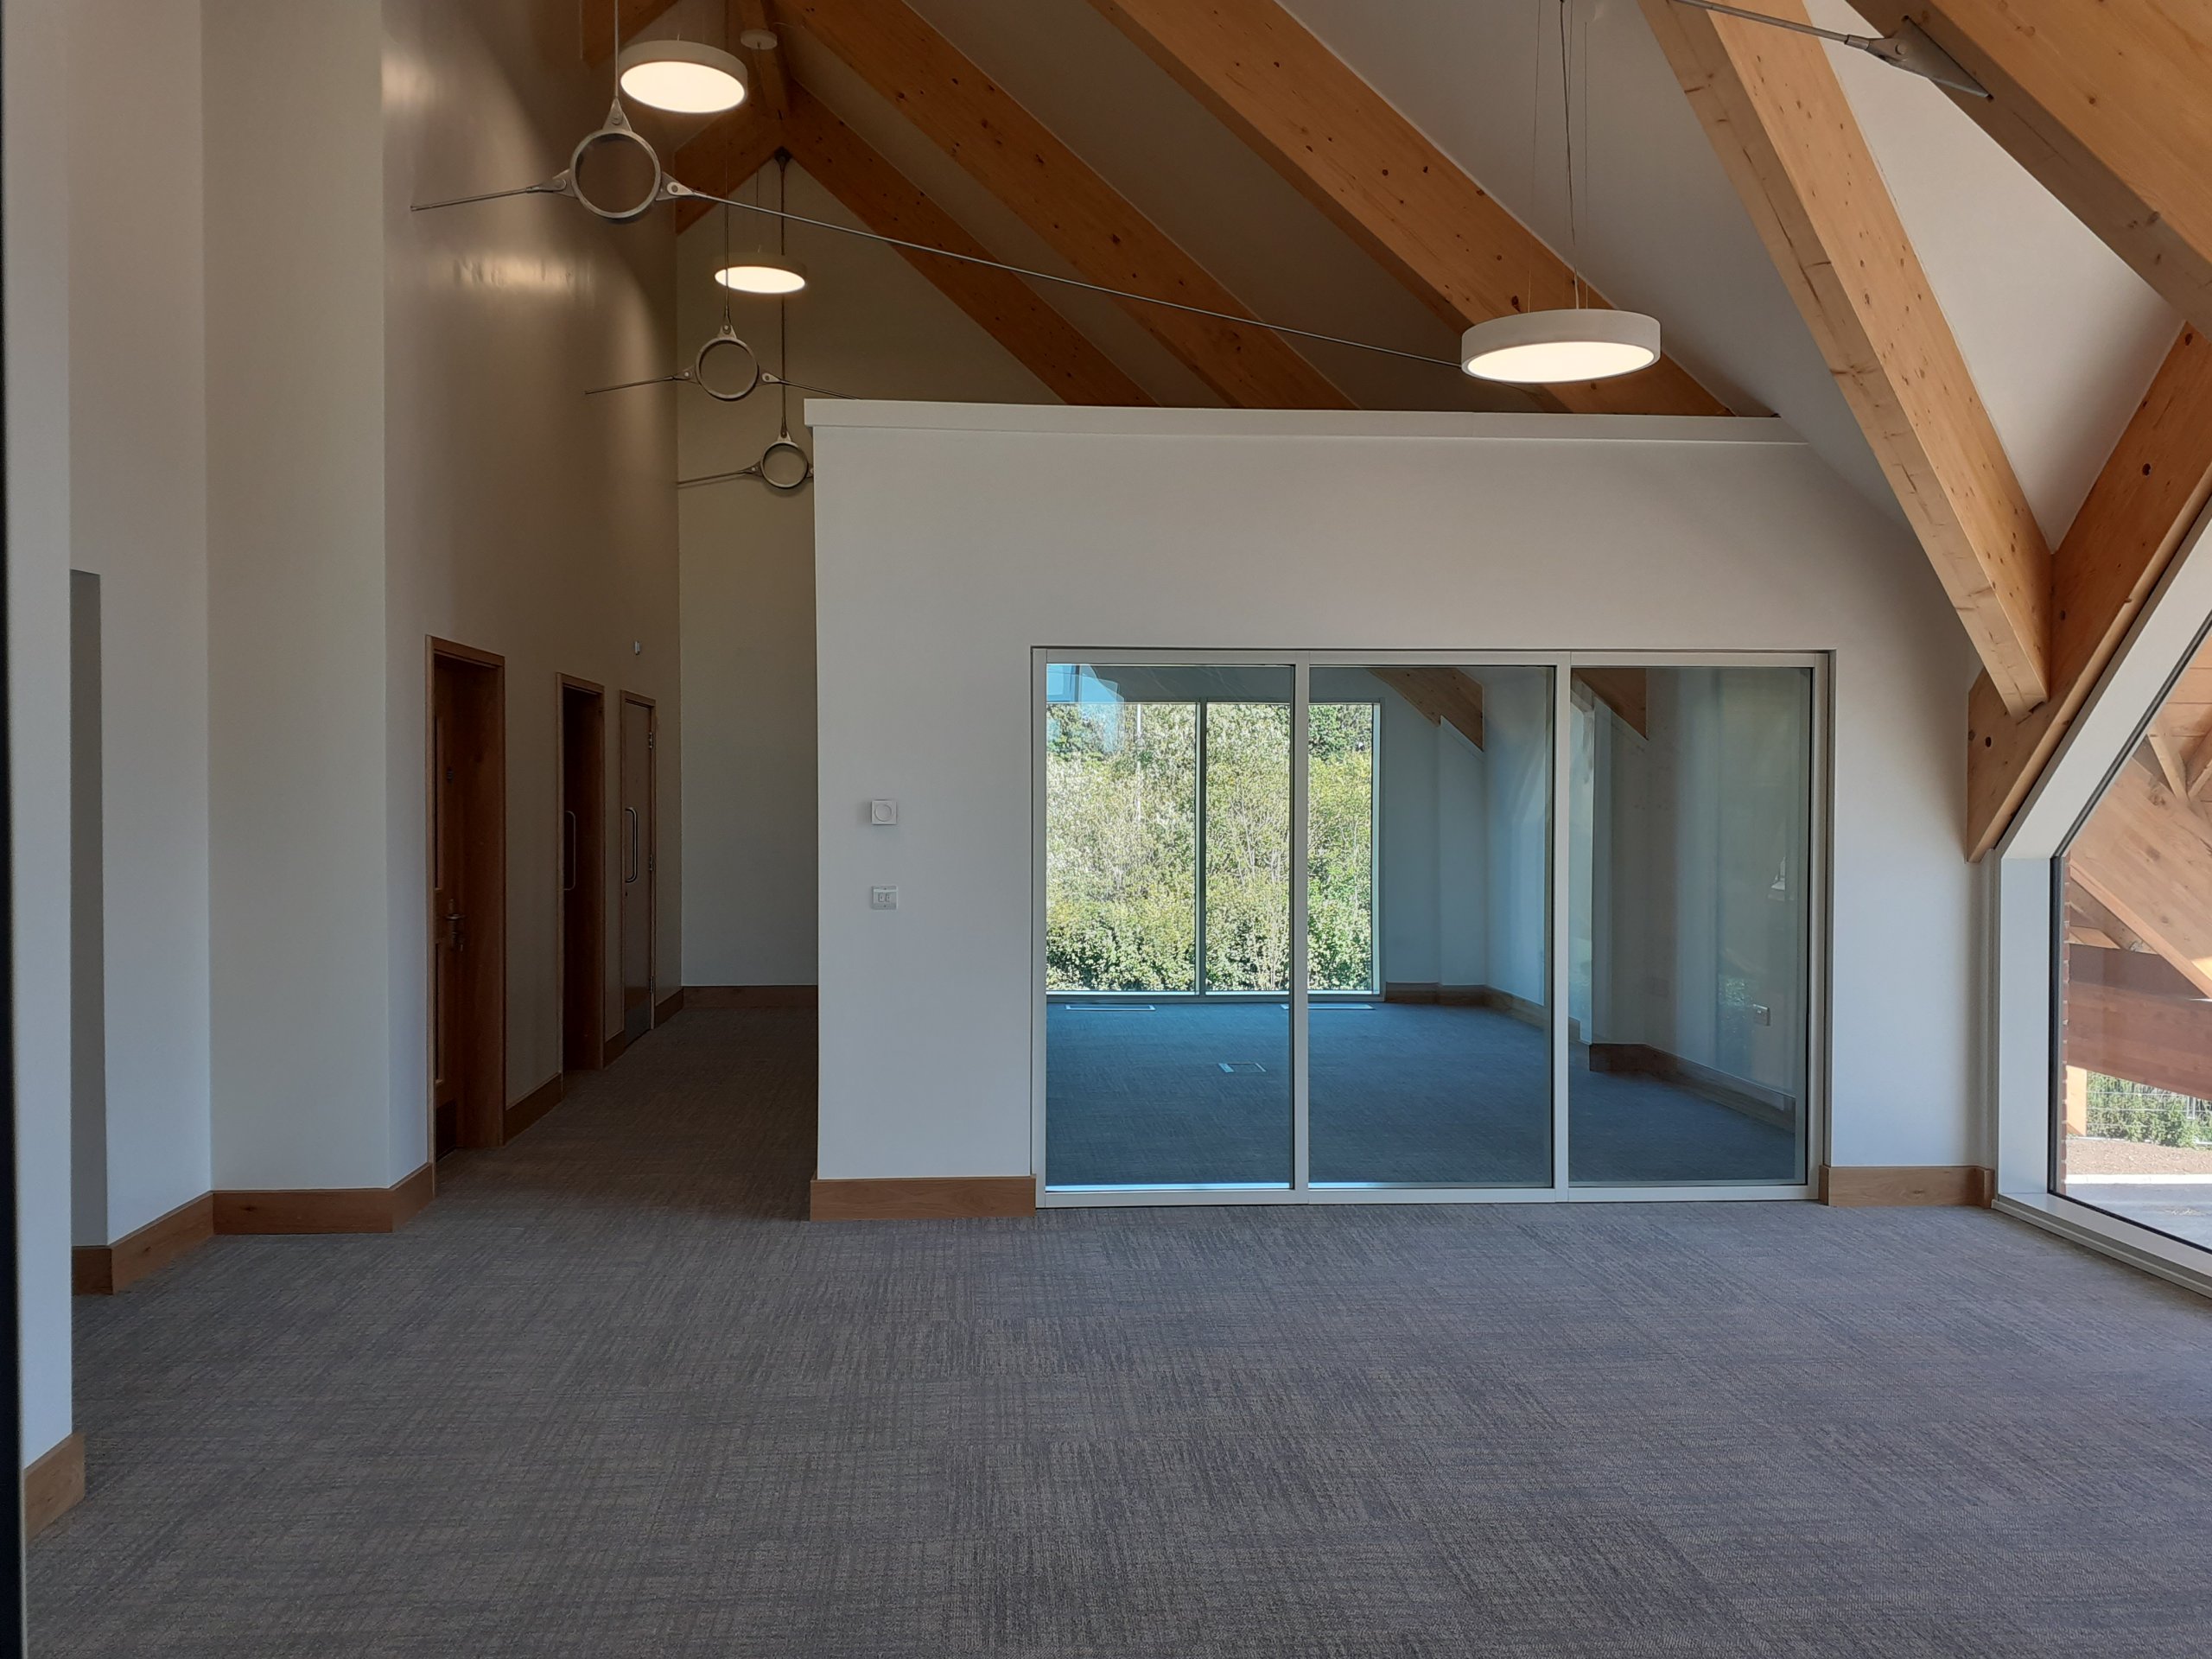 Wymondham offices - internal shot of the building